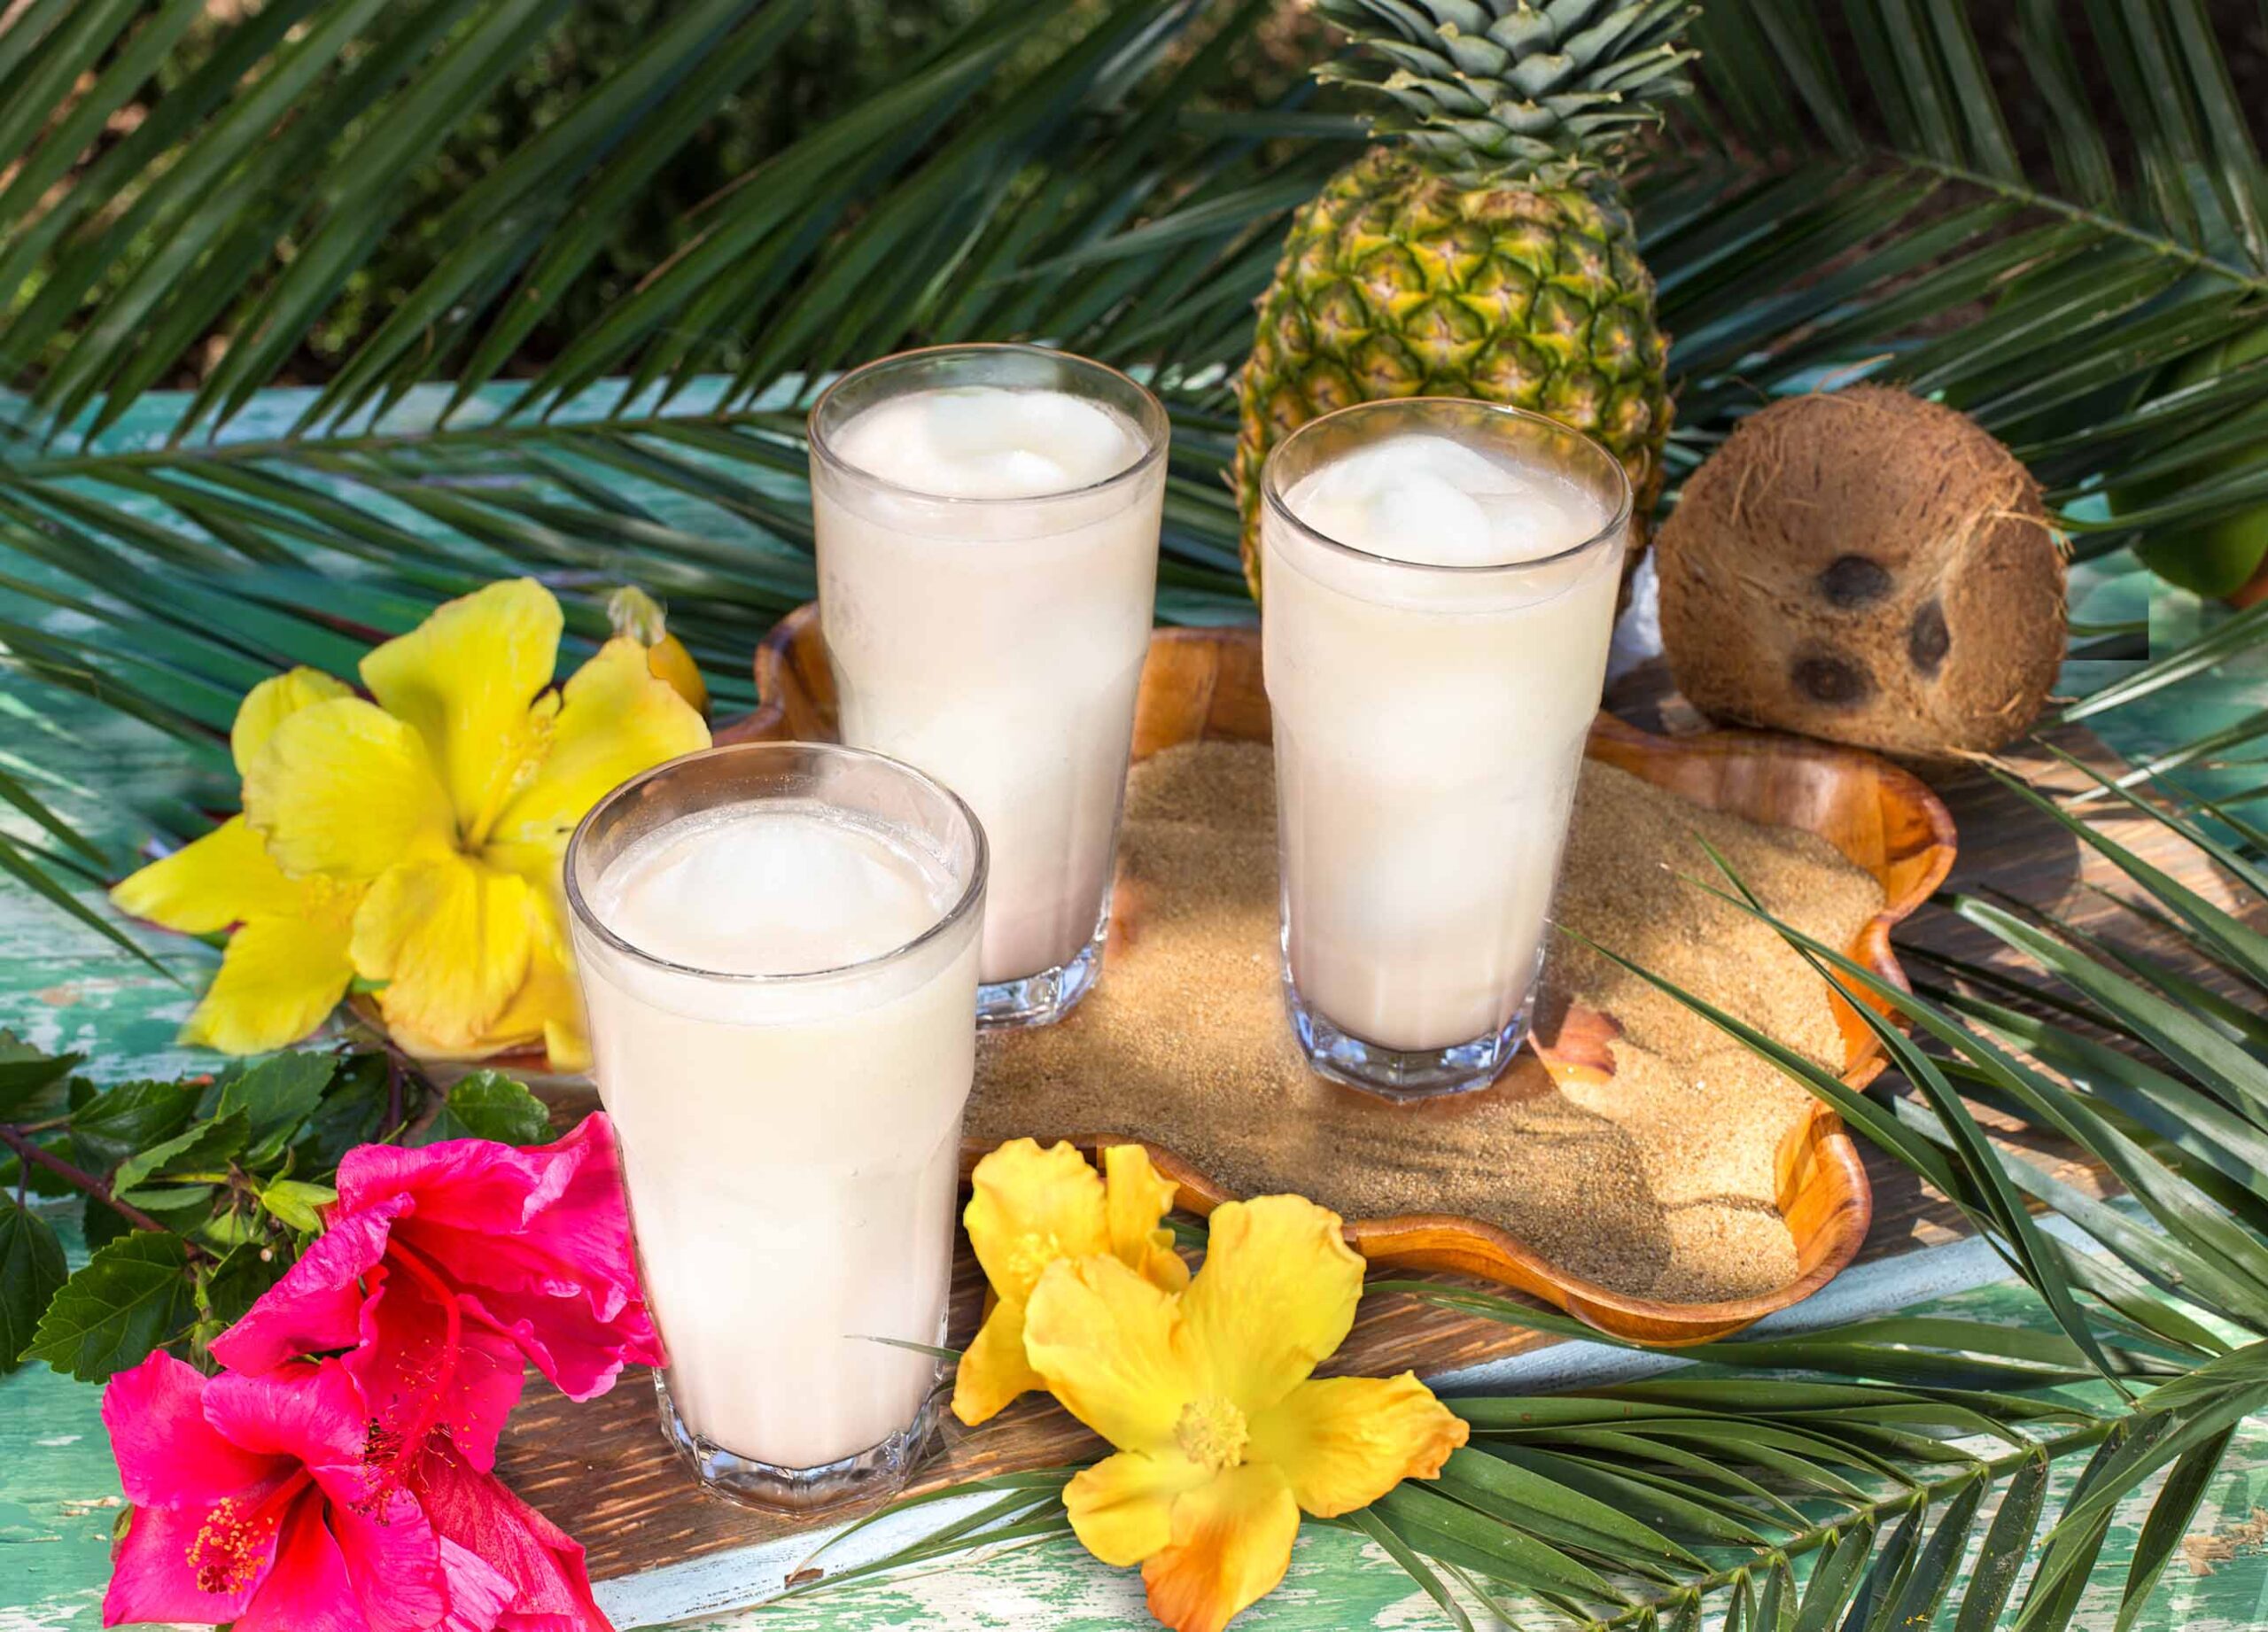 Three of our new monthly special Swirl drinks at our patio with a tropical table setting